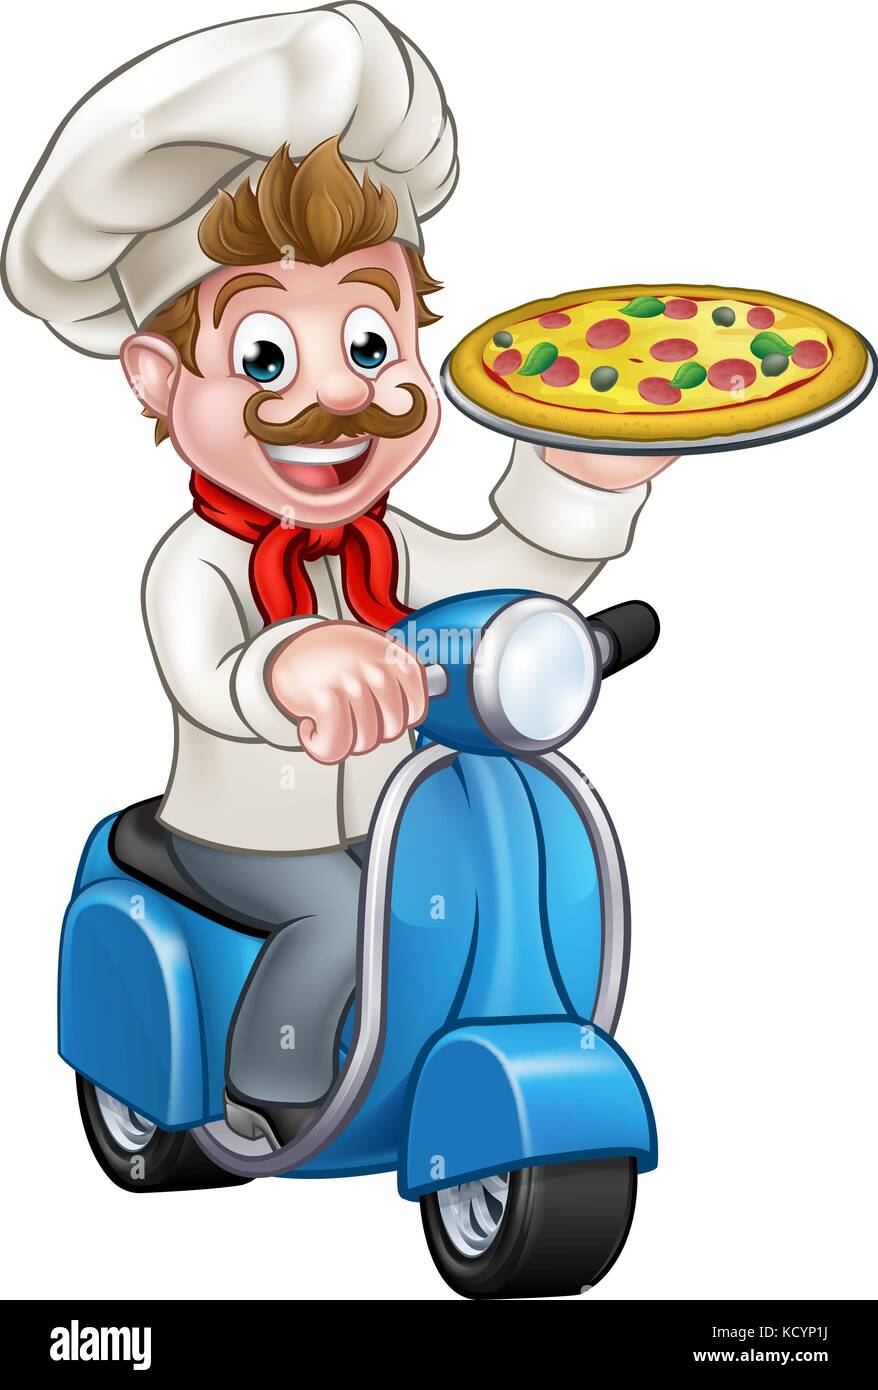 Cartoon Pizza Chef on Delivery Moped Scooter Stock Vector